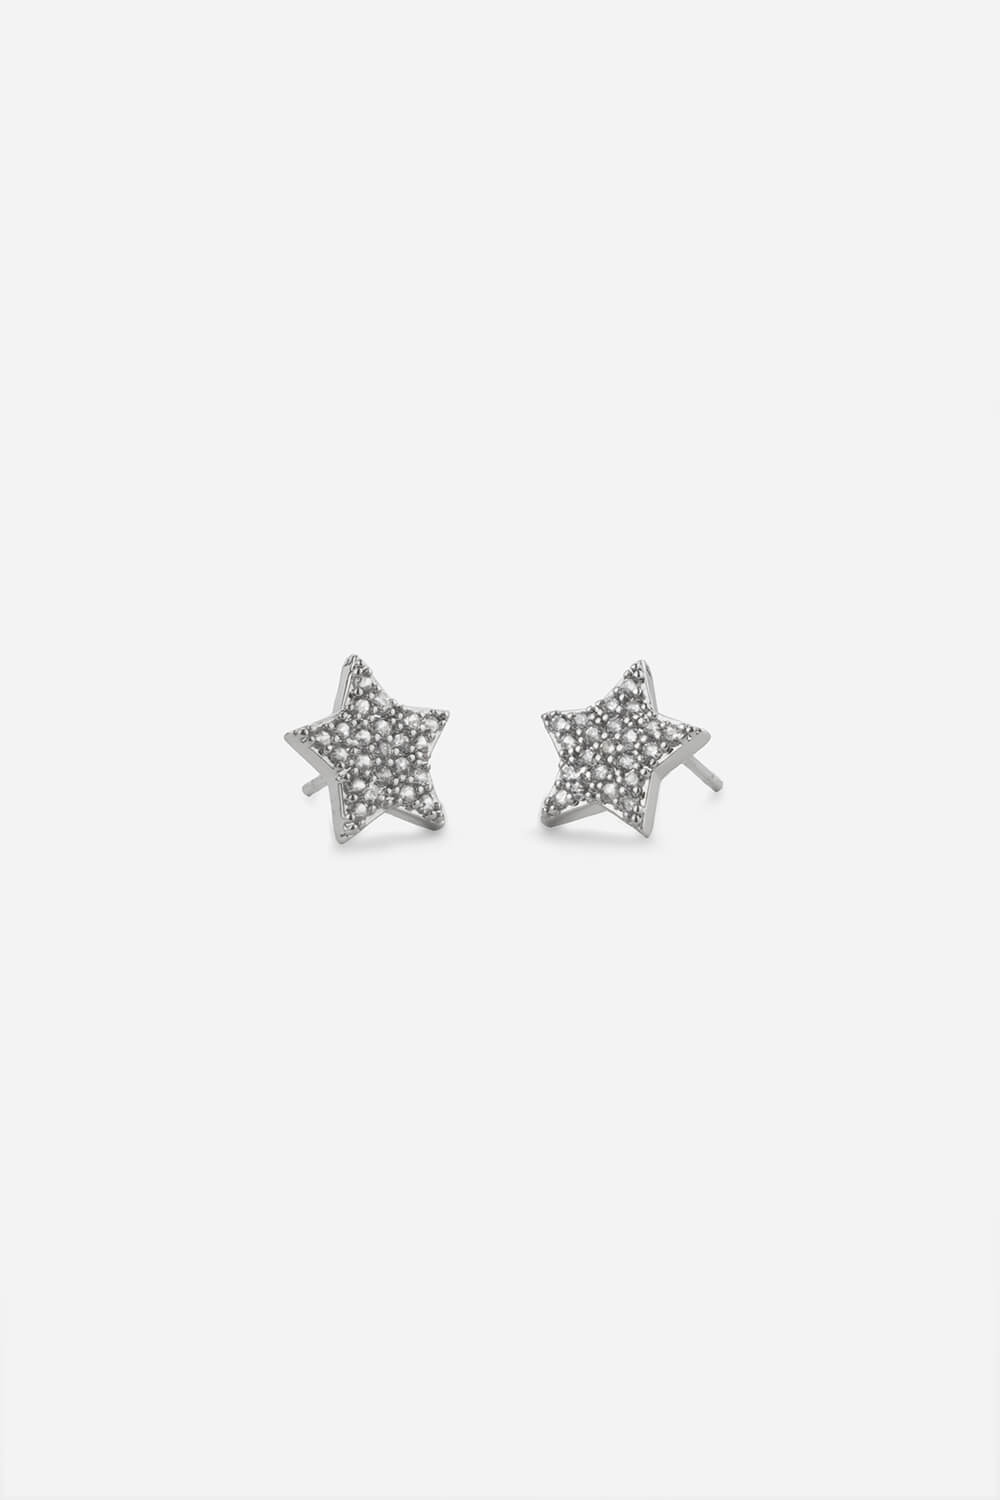 Silver Stainless Steel Plated Star Earrings, Image 2 of 2